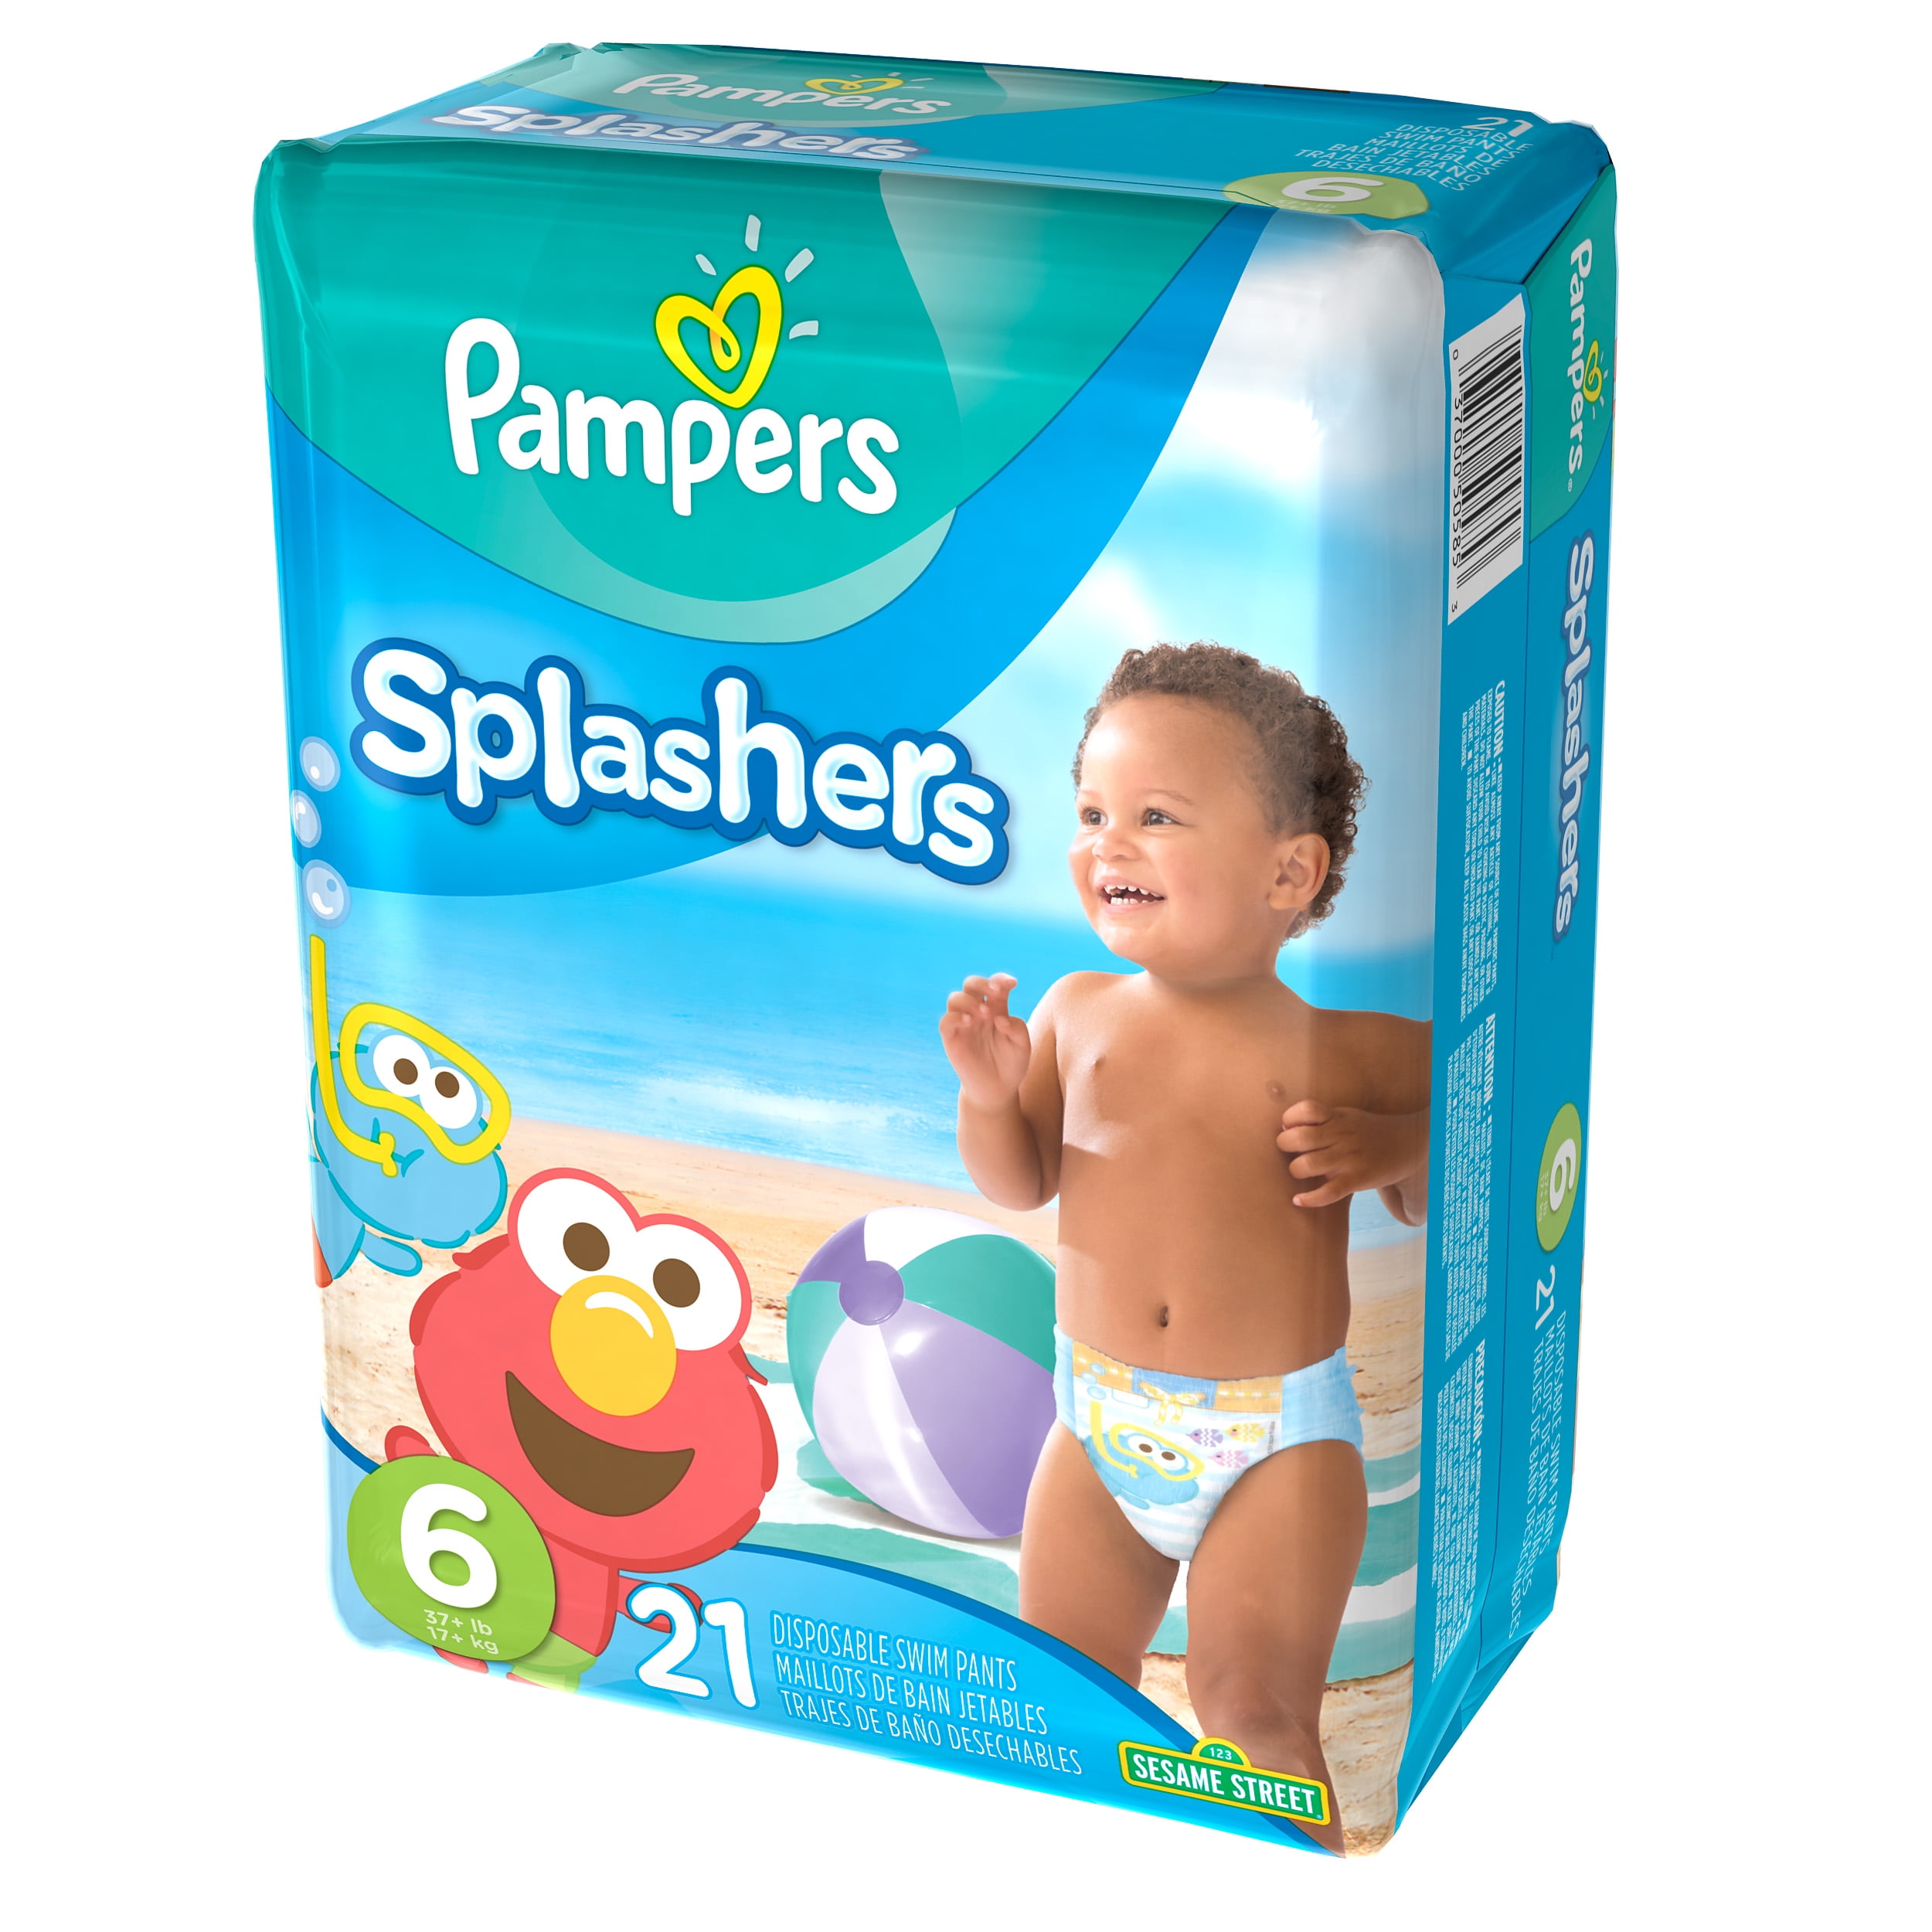 Snowstorm please do not solid Pampers Splashers Swim Diapers Size 5 22 count - Walmart.com